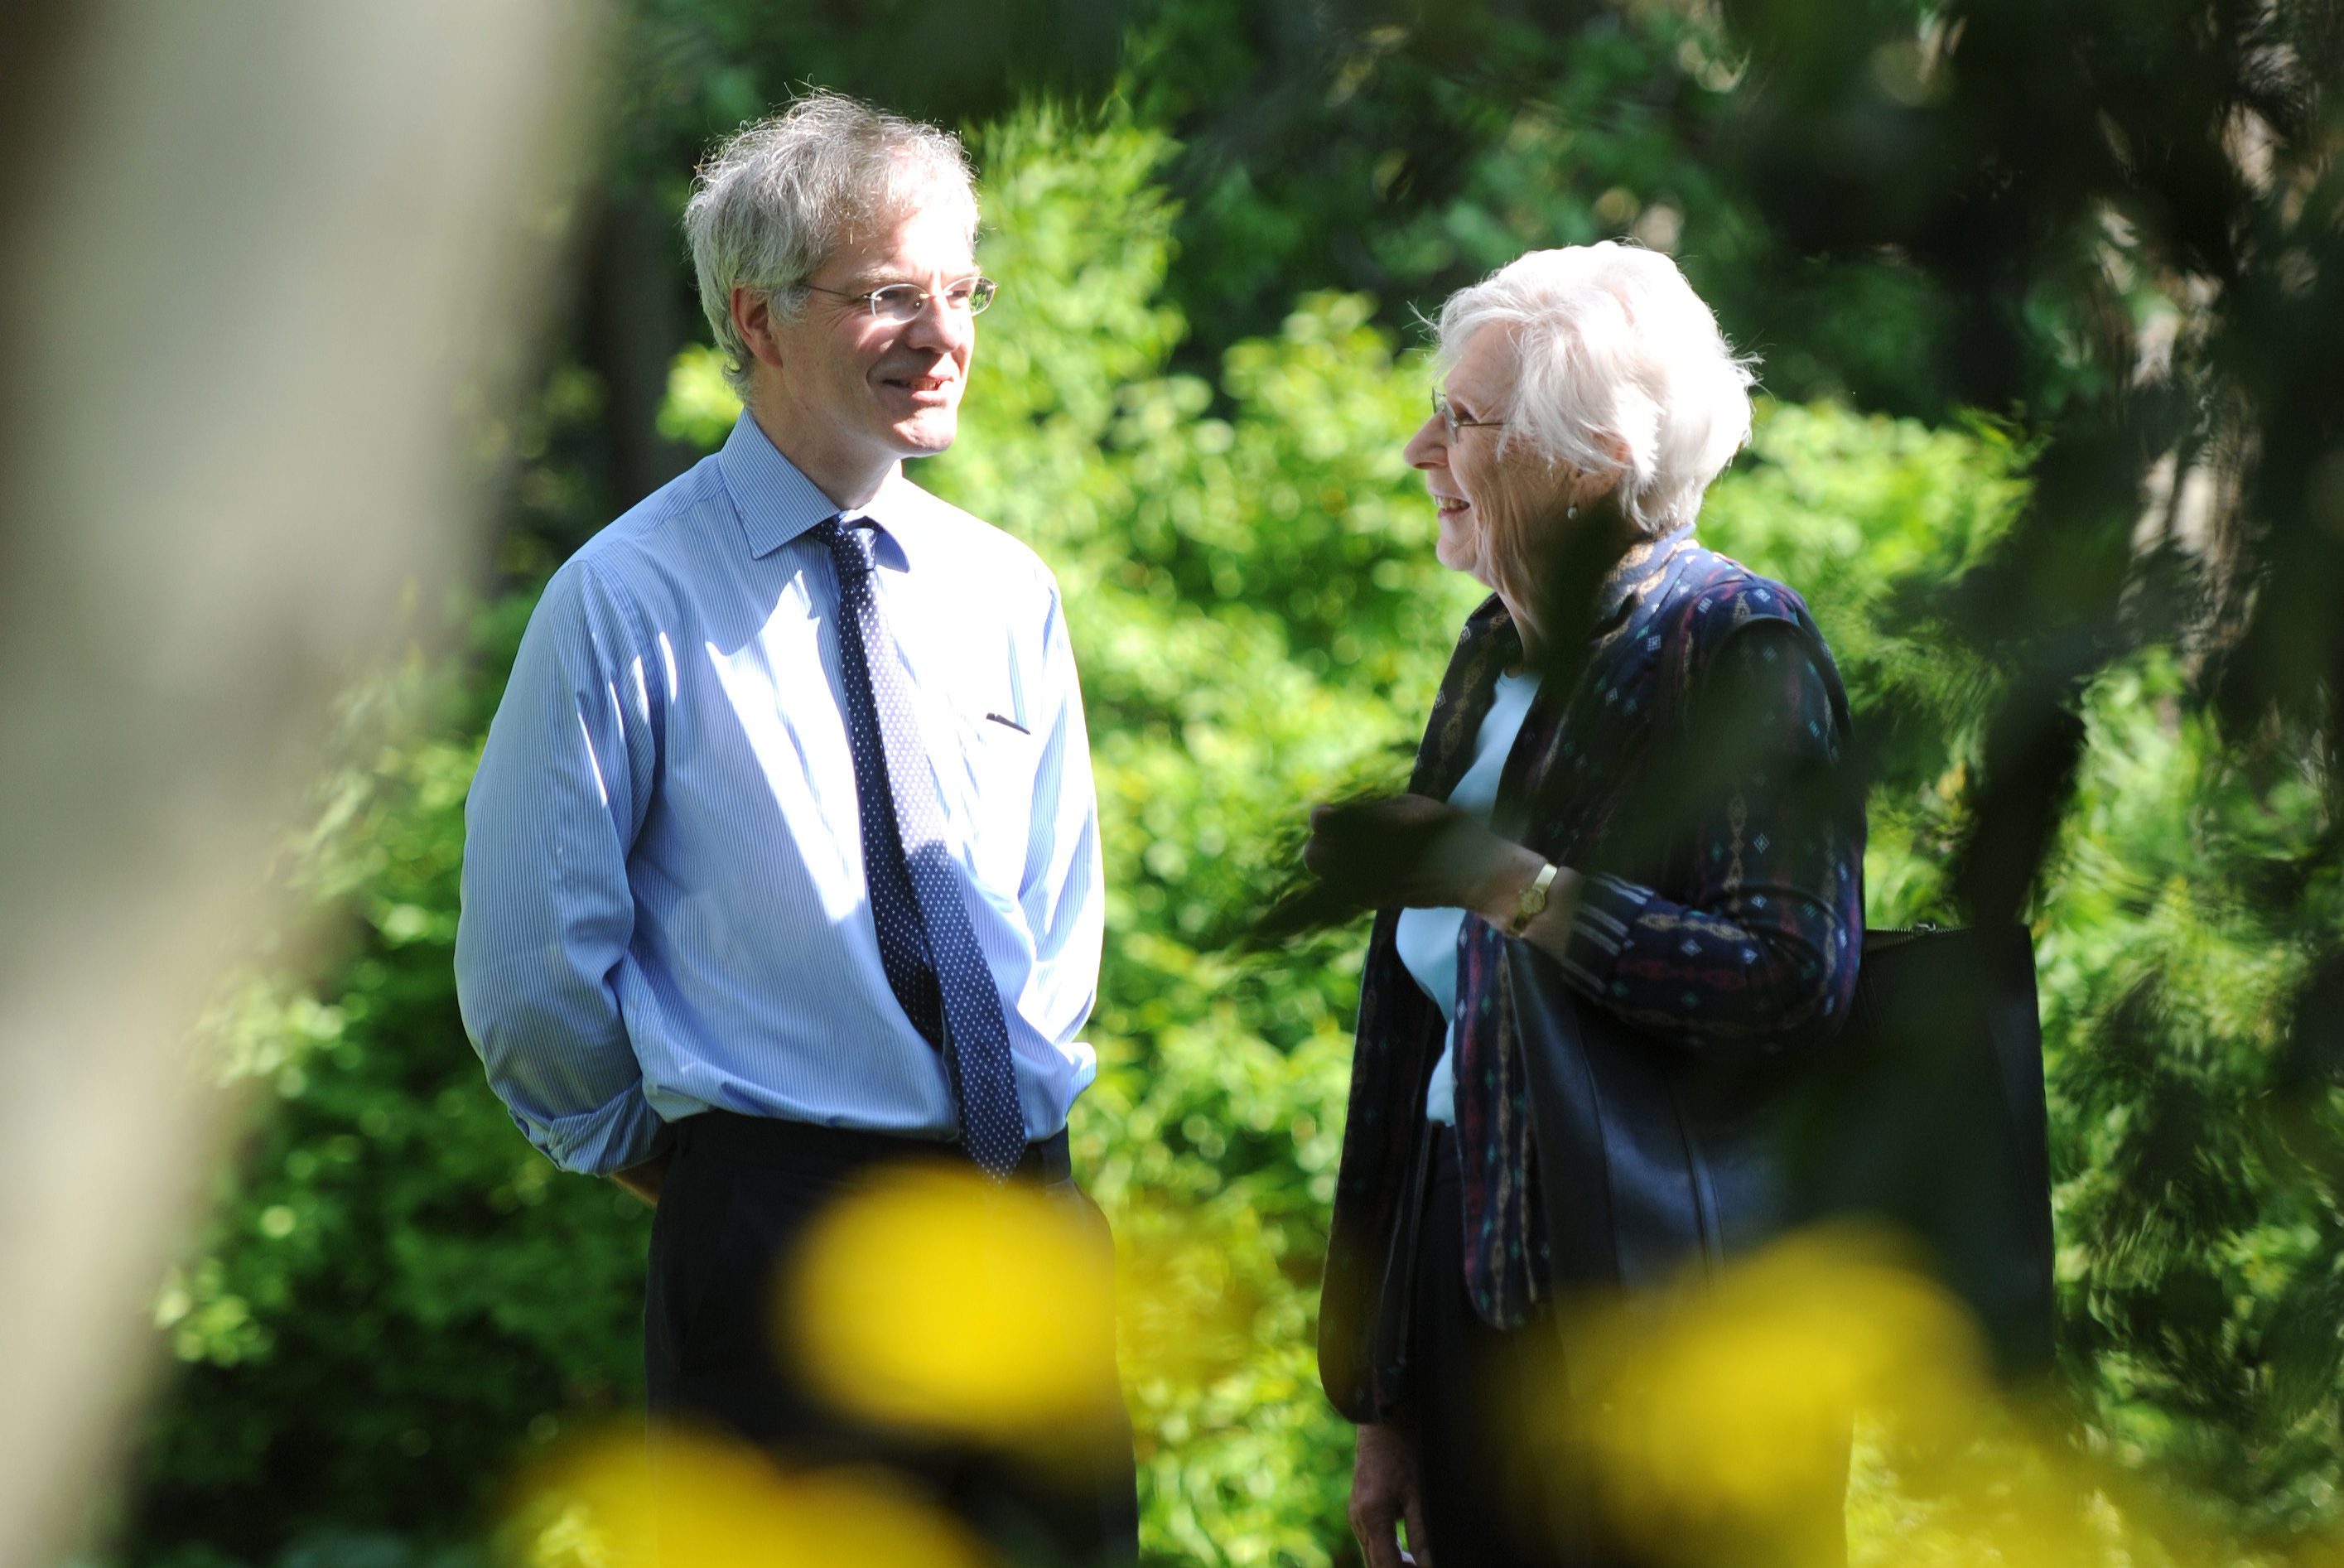 Friends of the garden Mark McGilchrist and Tricia Paton search for inspiration